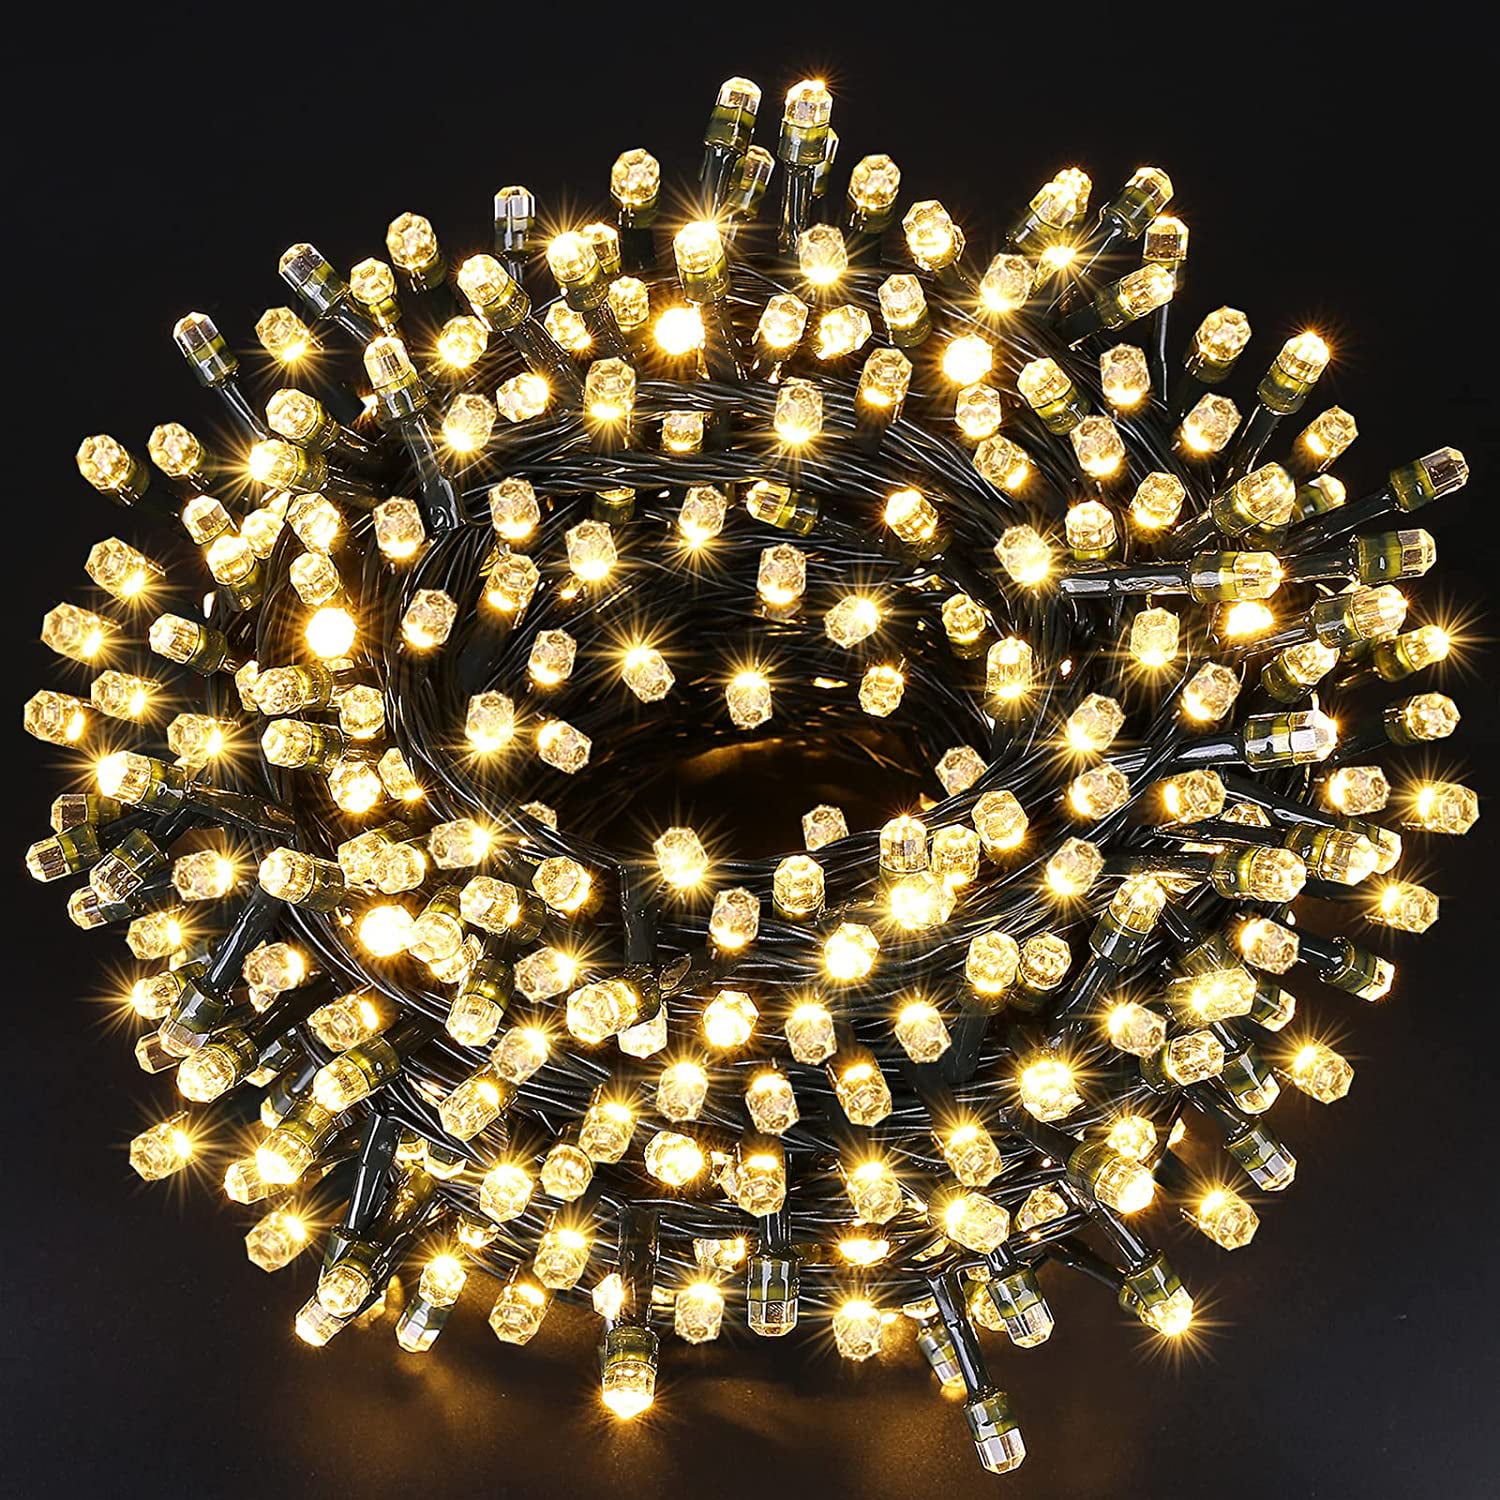 164FT 250 Leds Warm White String Fairy Lights Lighting 8 Modes  Christmas Party 